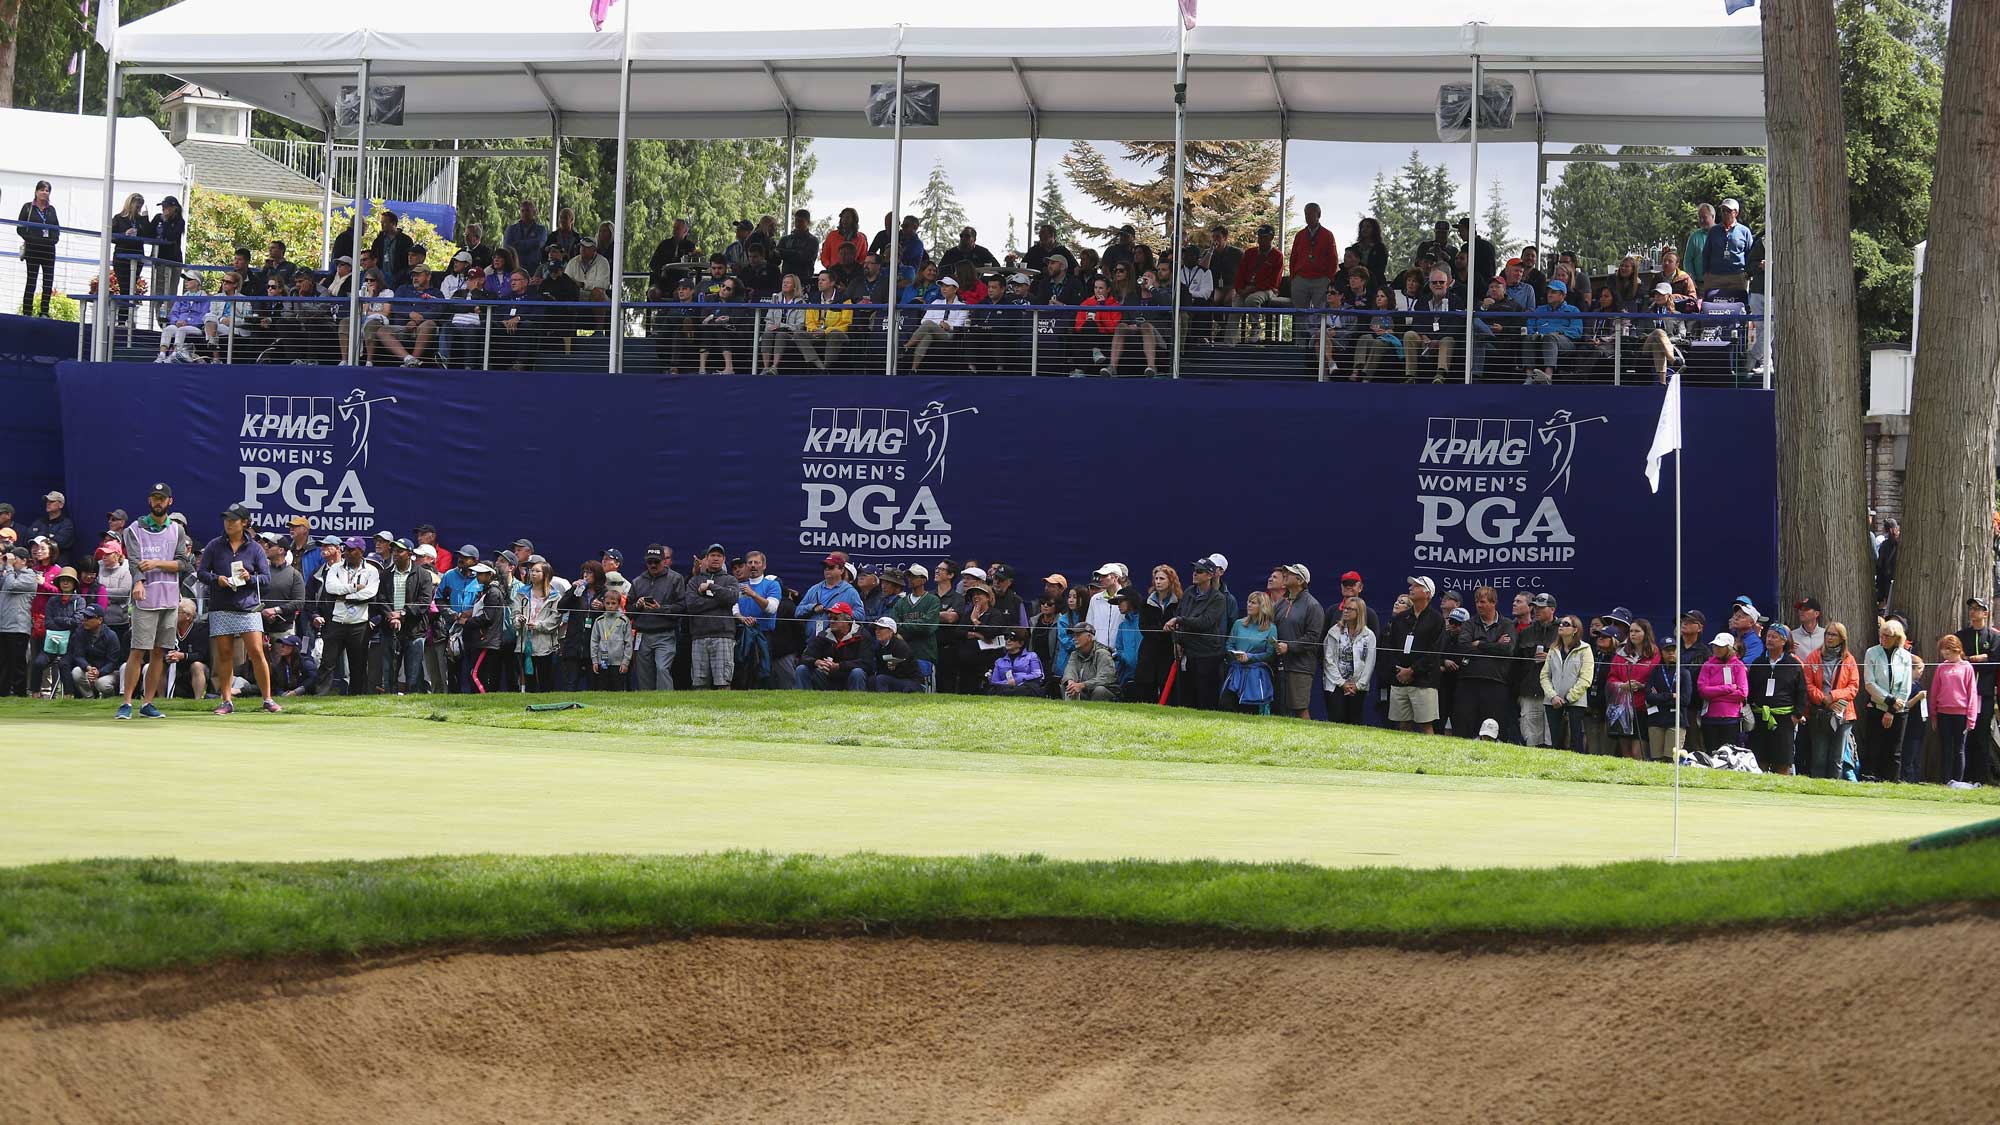 Fans watch the play on the 18th hole during the third round of the KPMG Women's PGA Championship